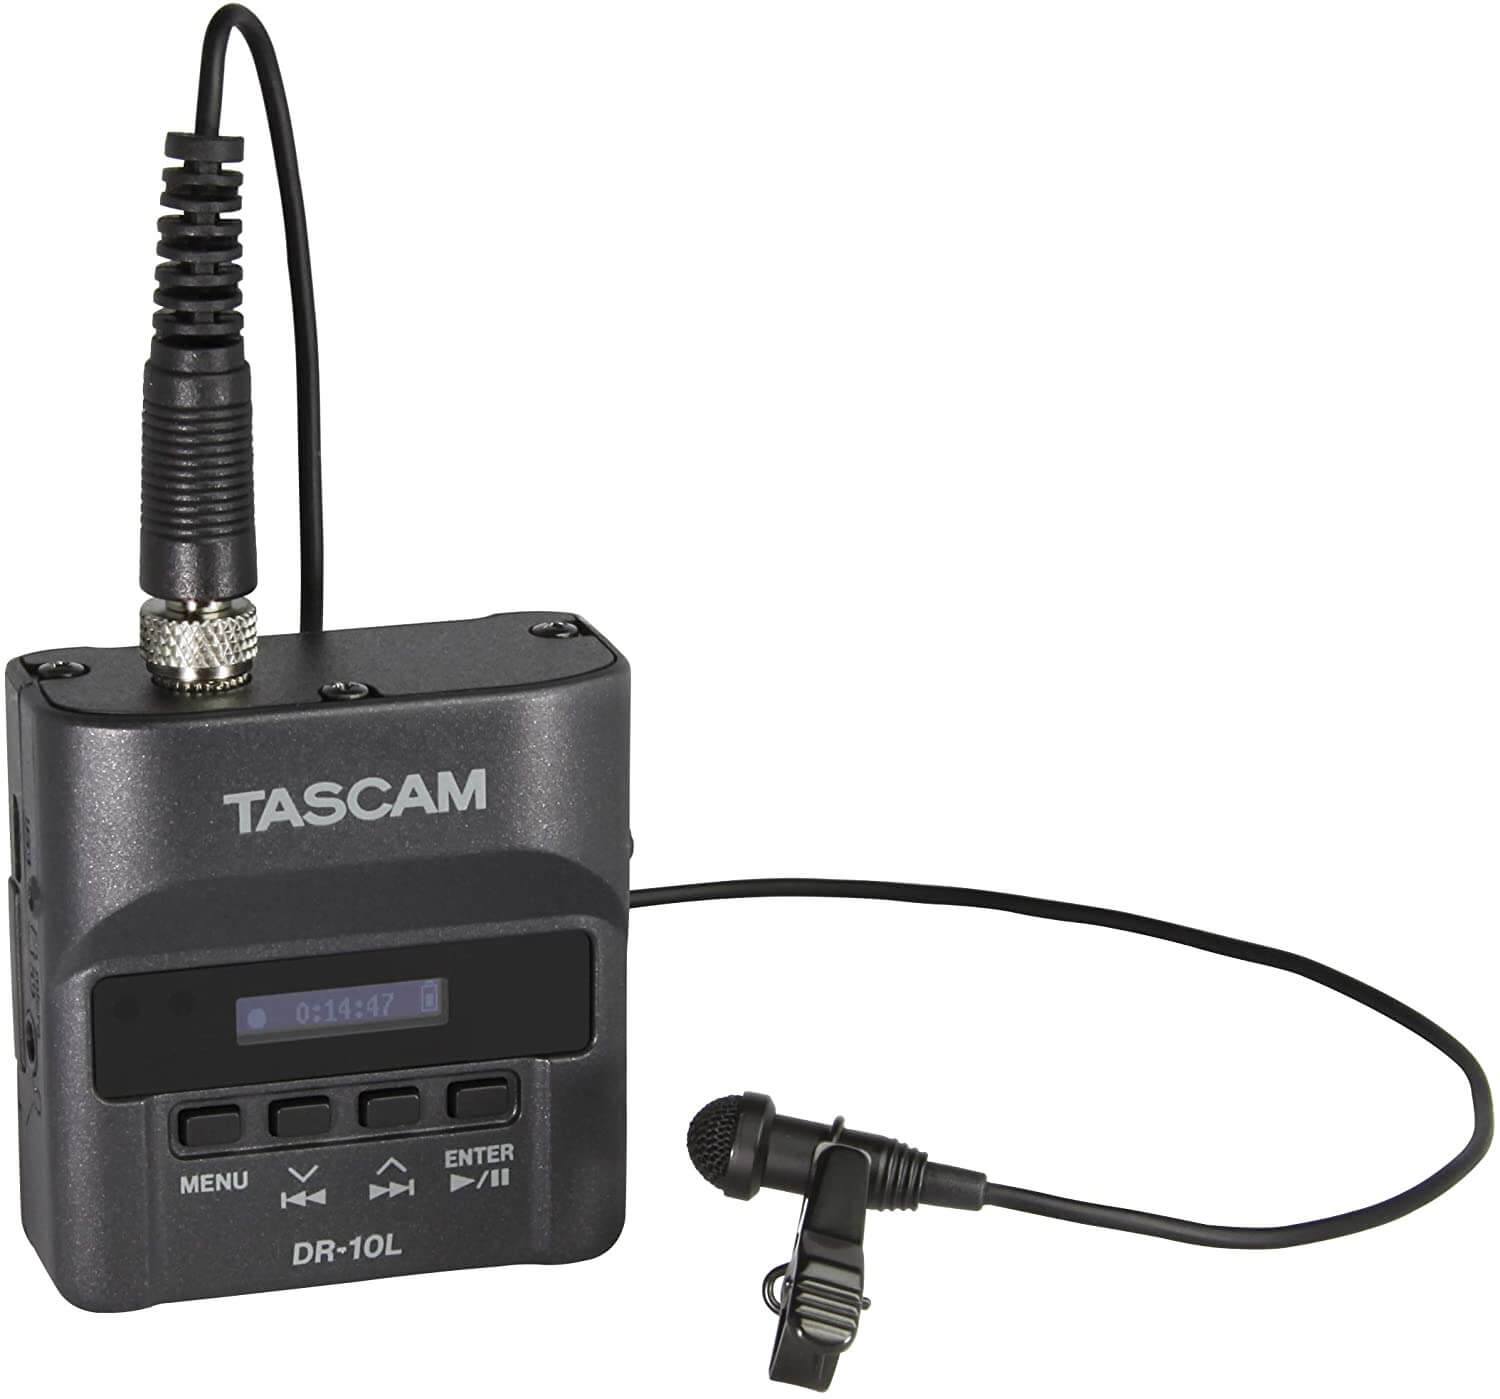 Tascam lav and portable recorder